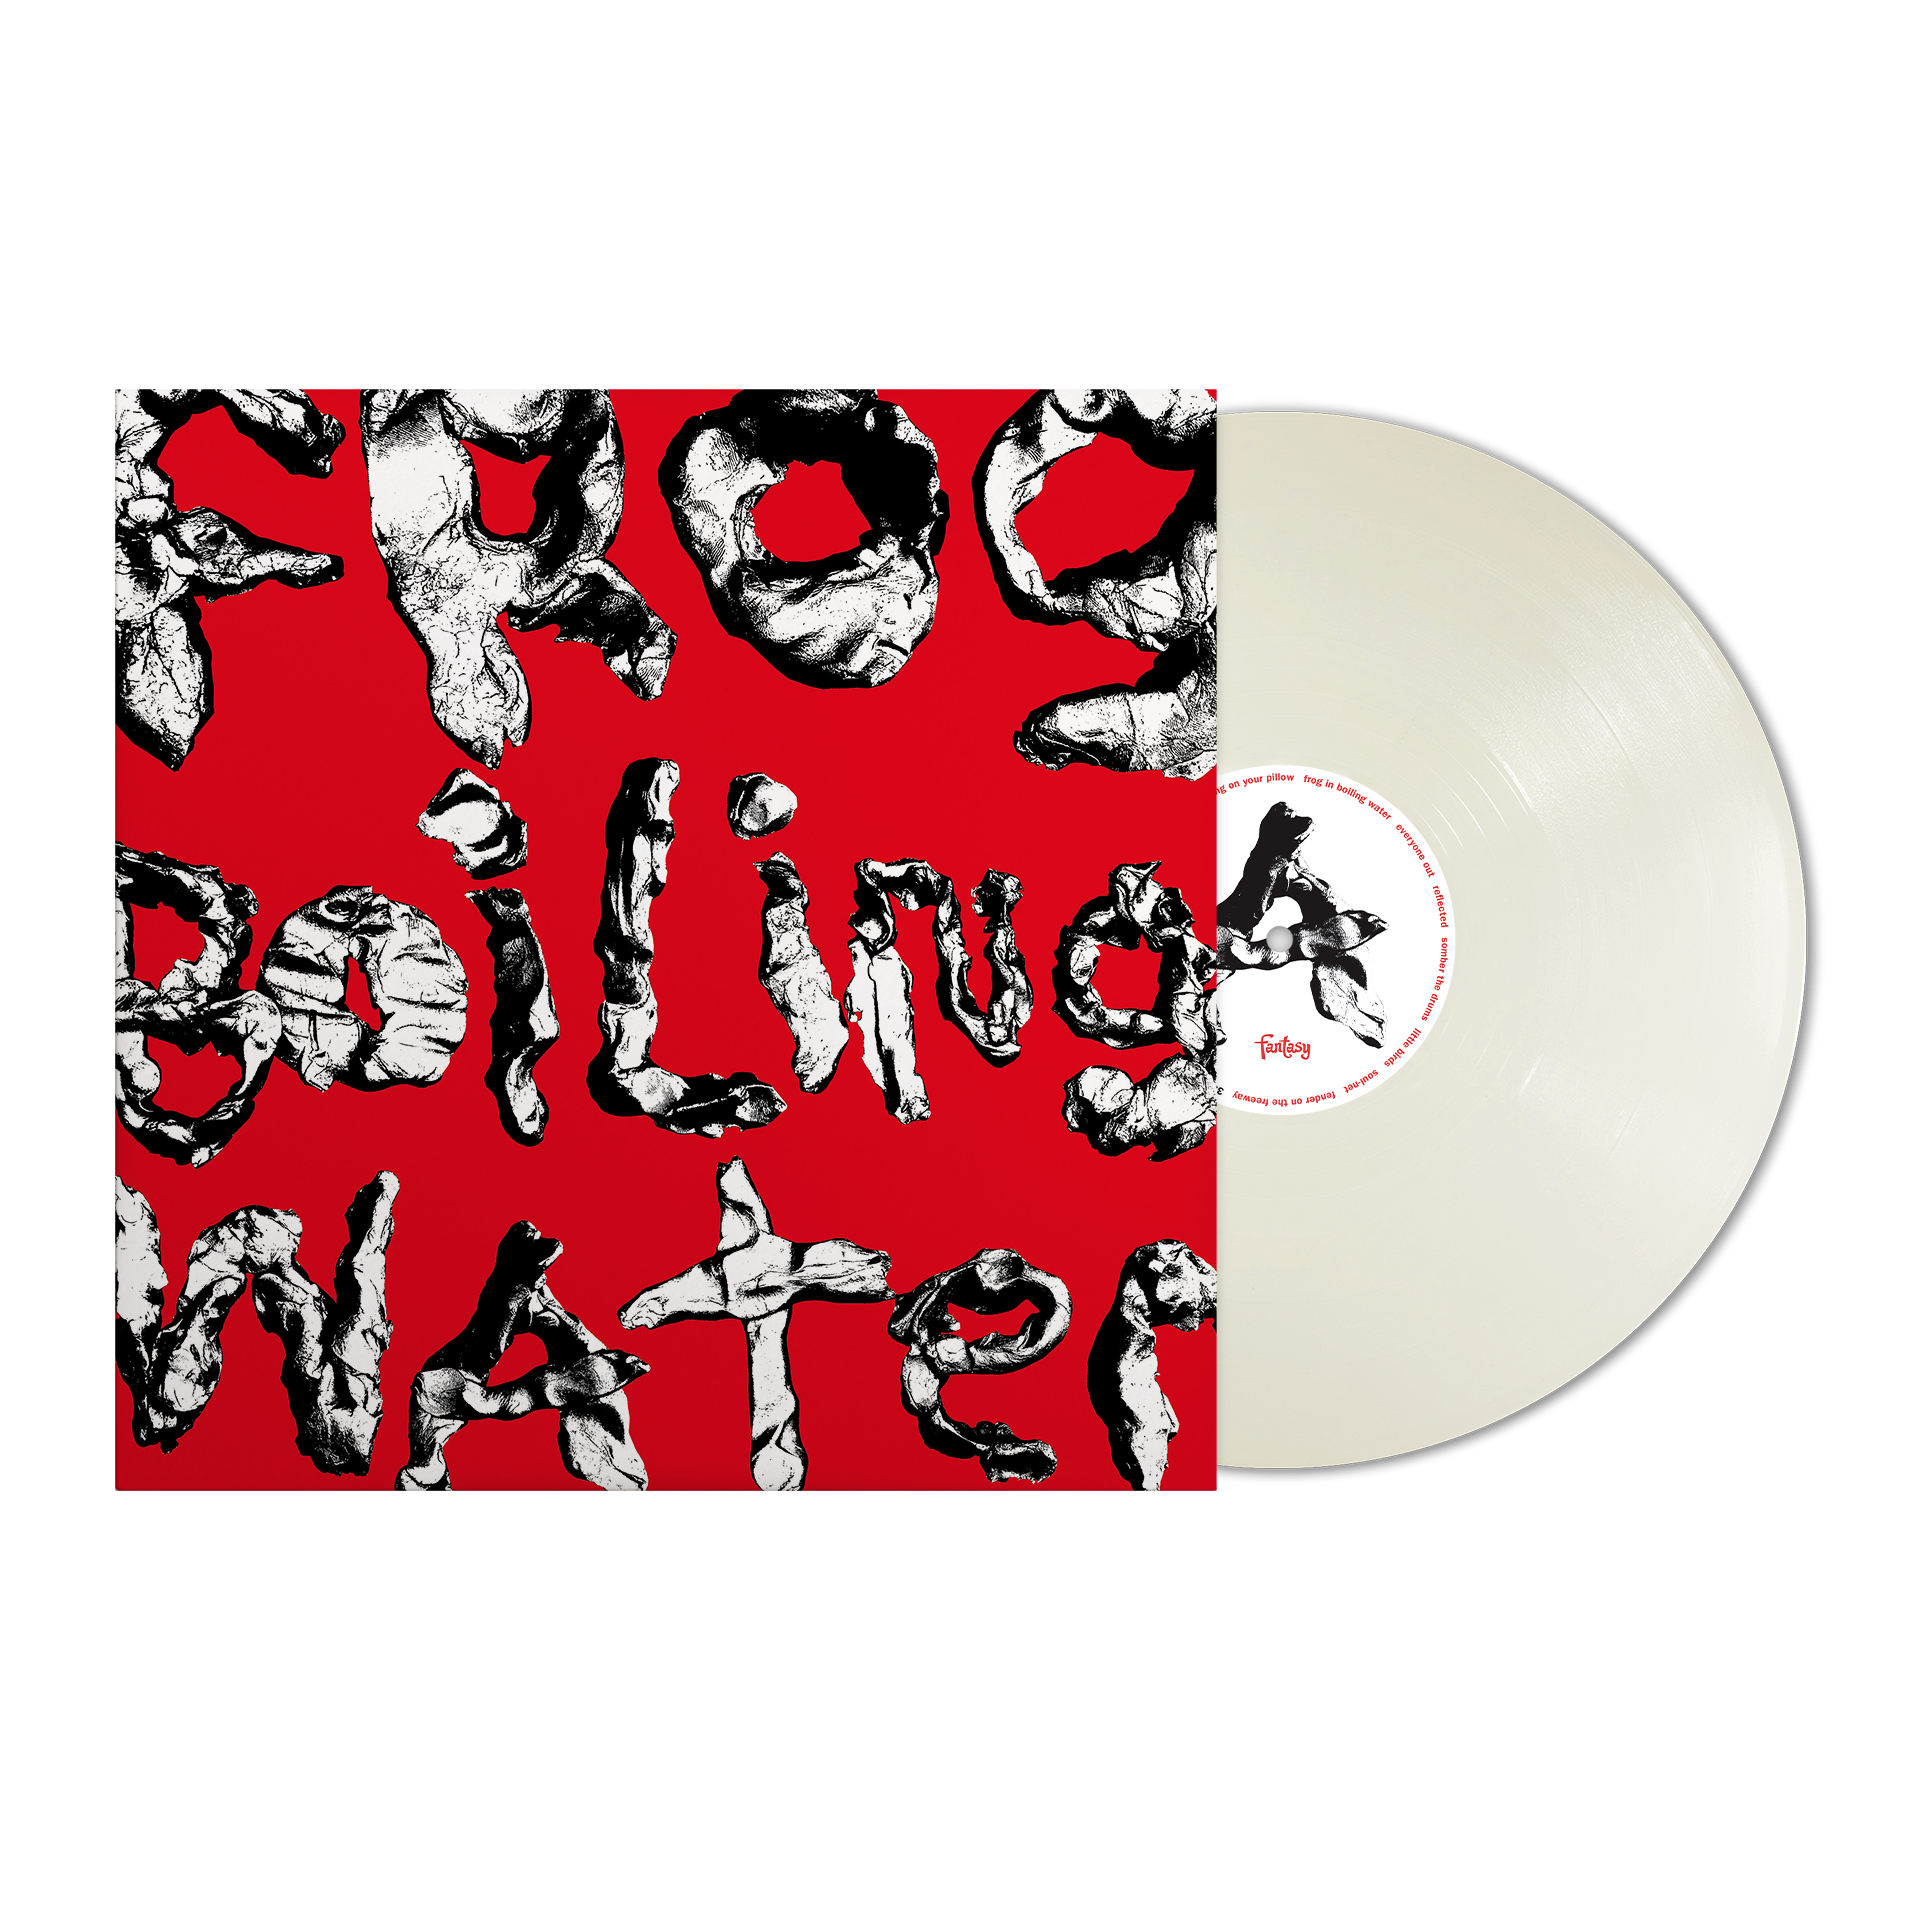 DIIV - Frog In Boiling Water: Limited Opaque White Vinyl LP